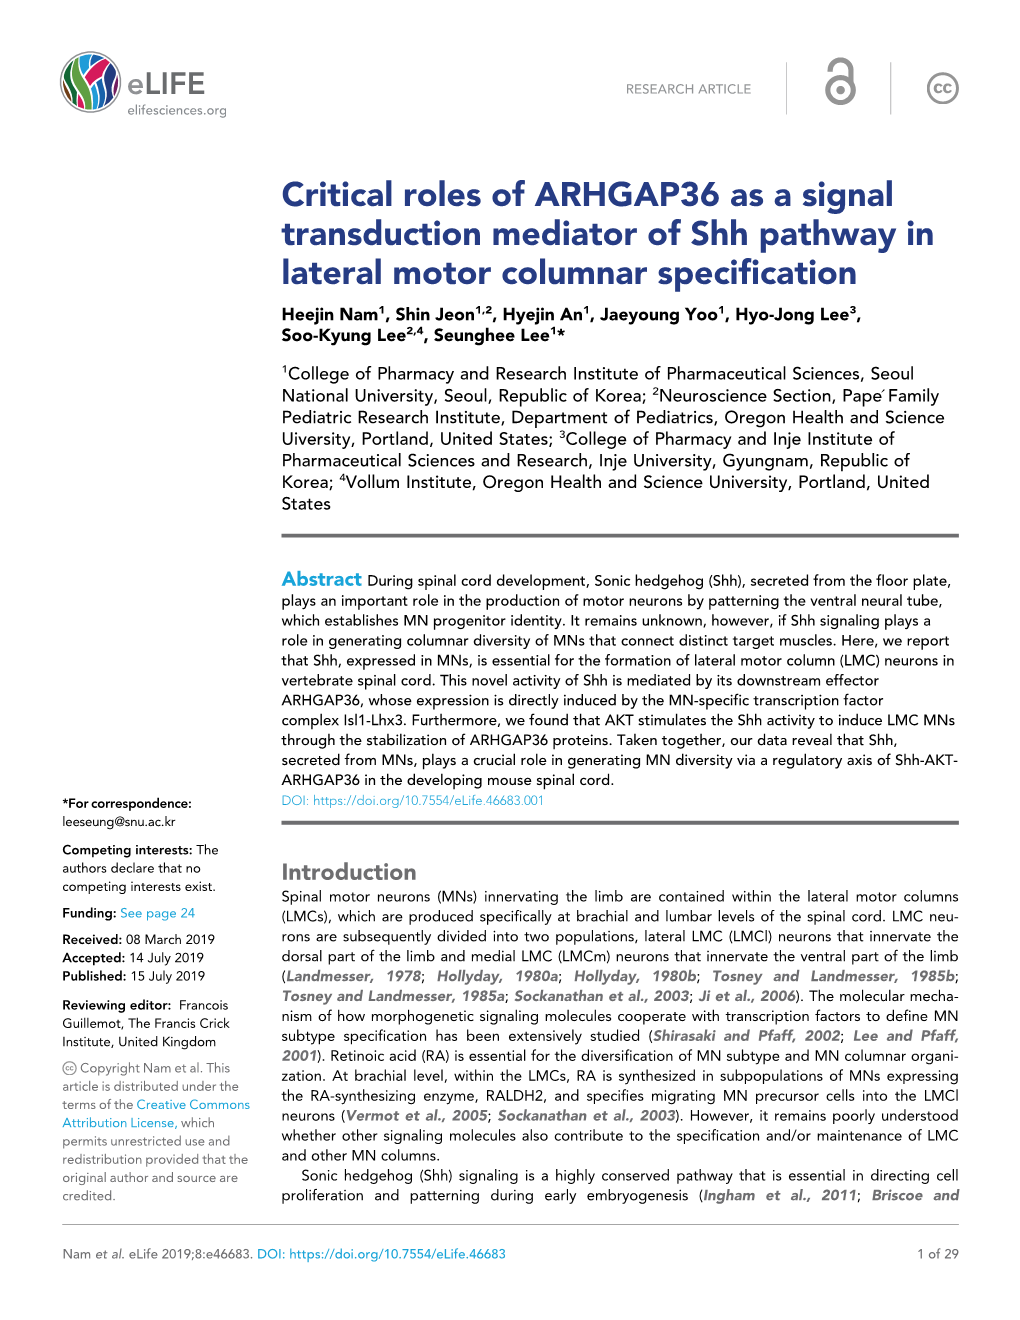 Critical Roles of ARHGAP36 As a Signal Transduction Mediator of Shh